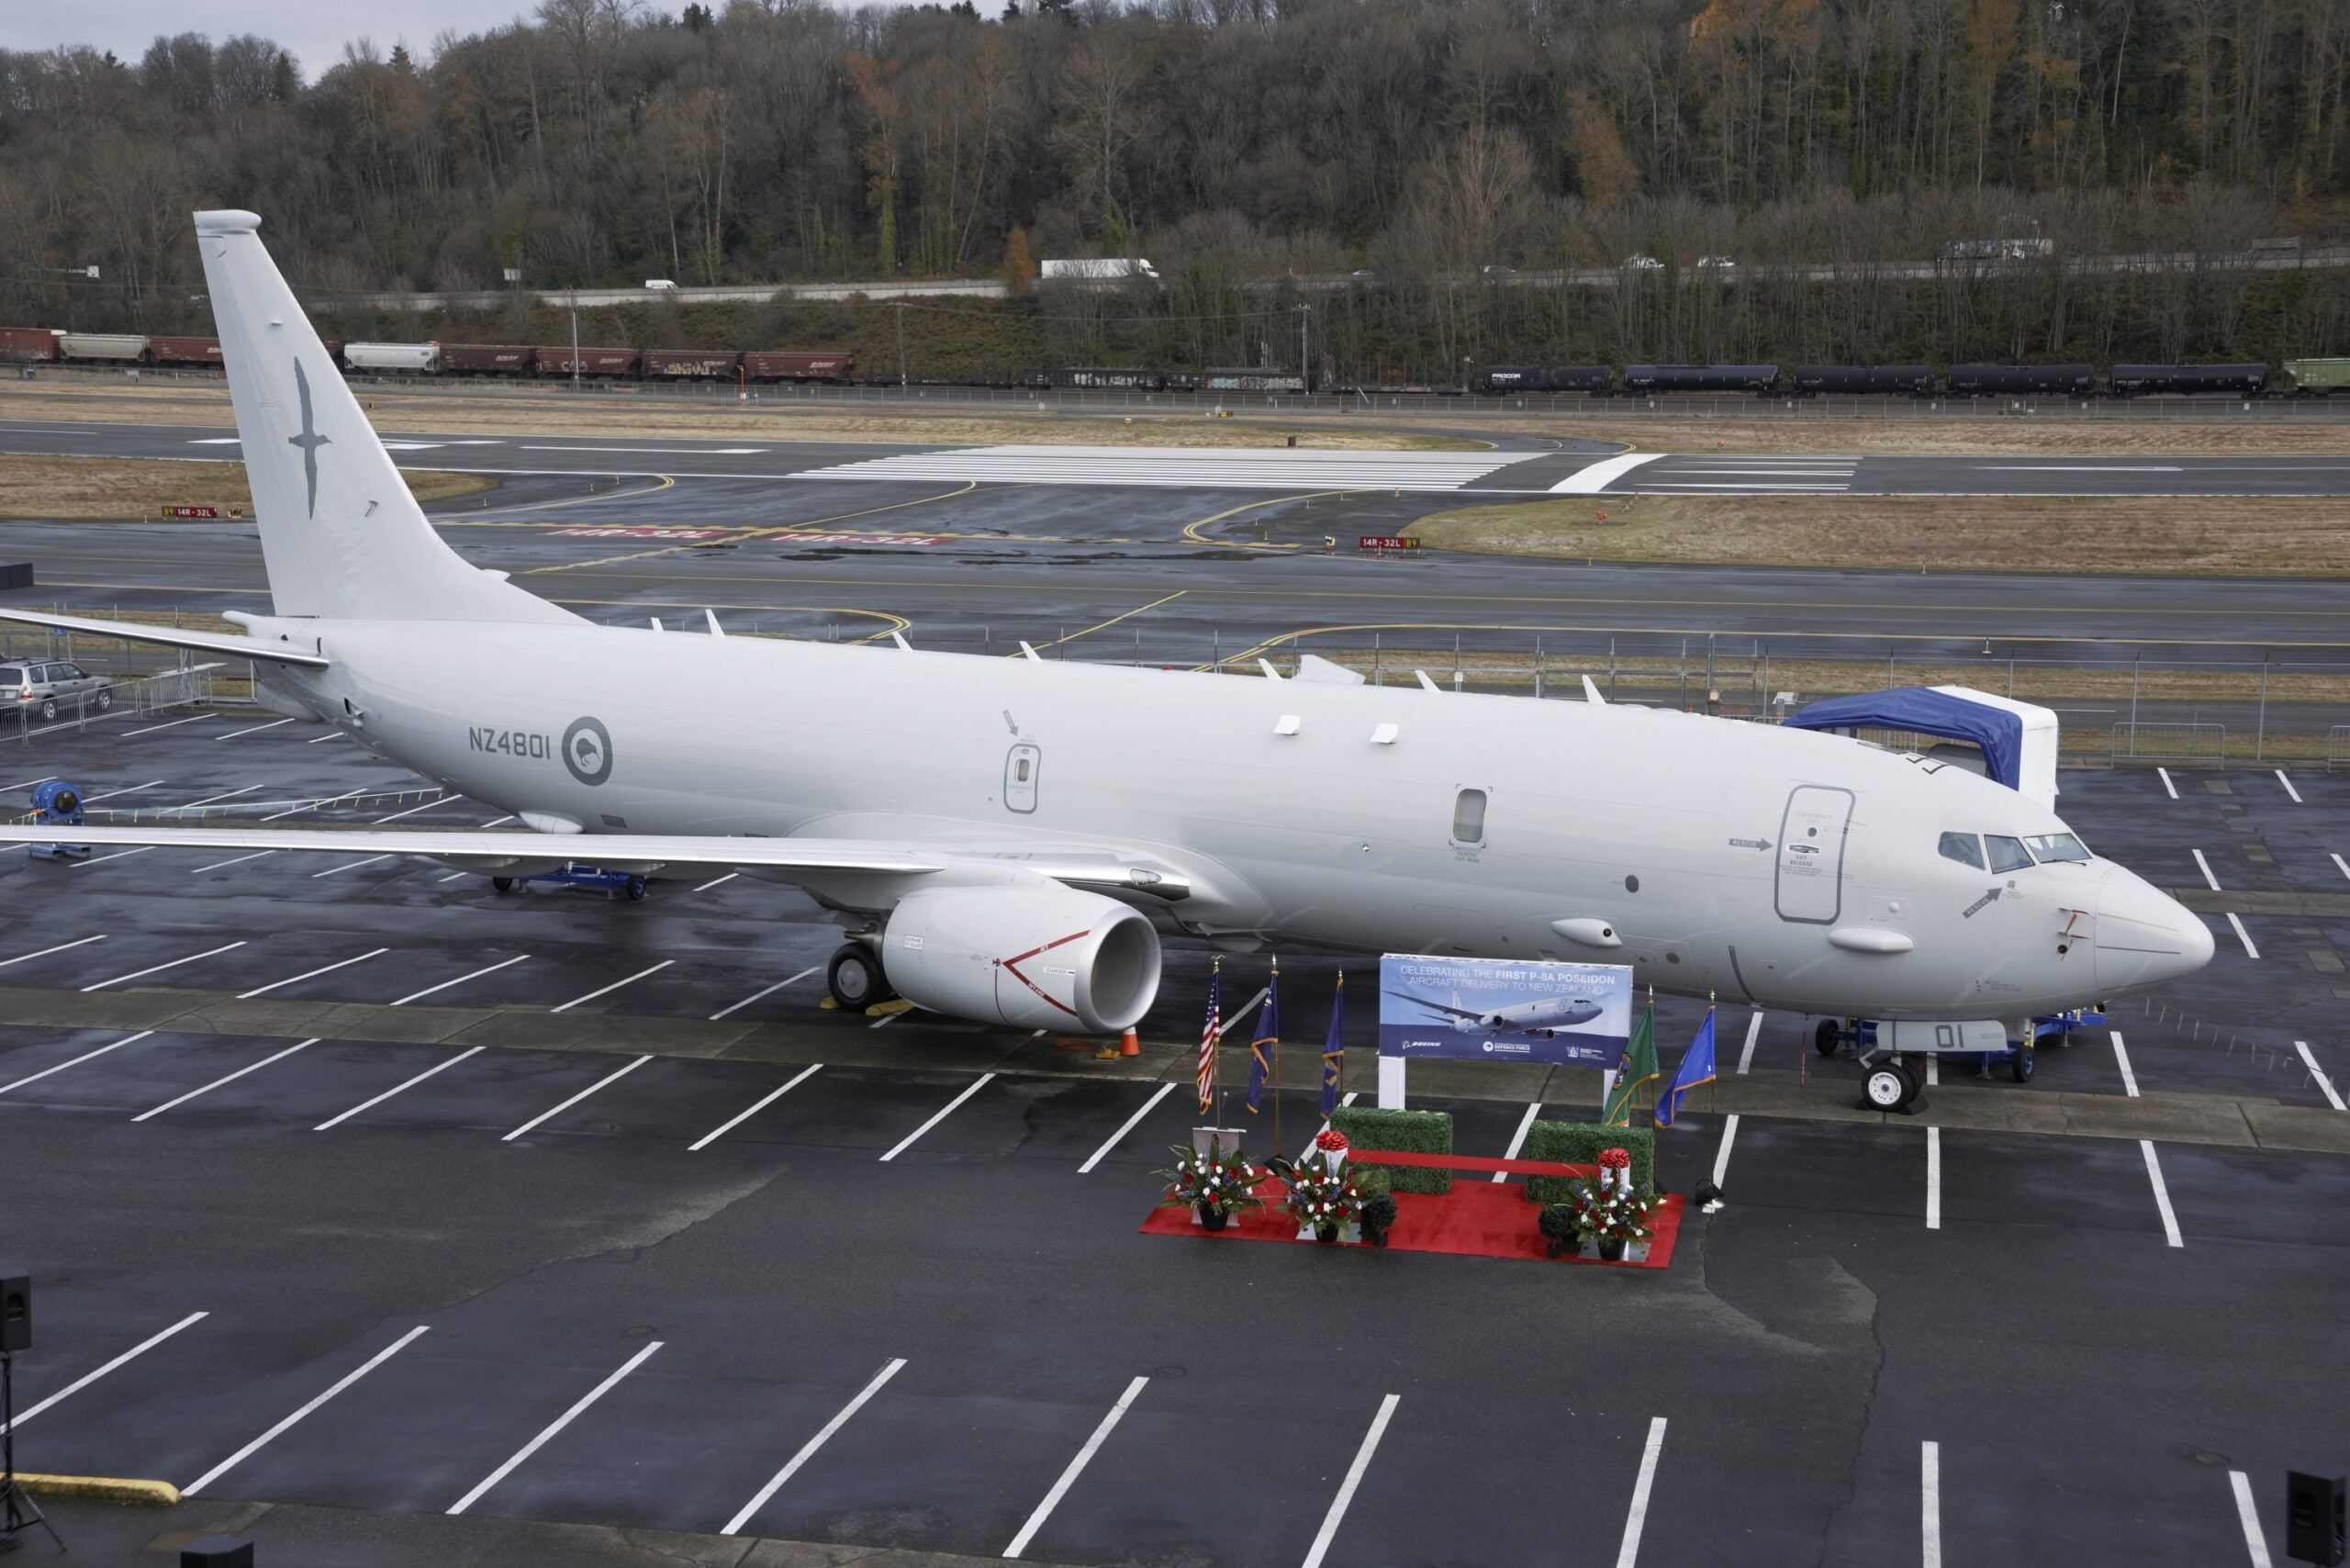 Boeing Delivers First P-8A Poseidon Maritime Aircraft to New Zealand